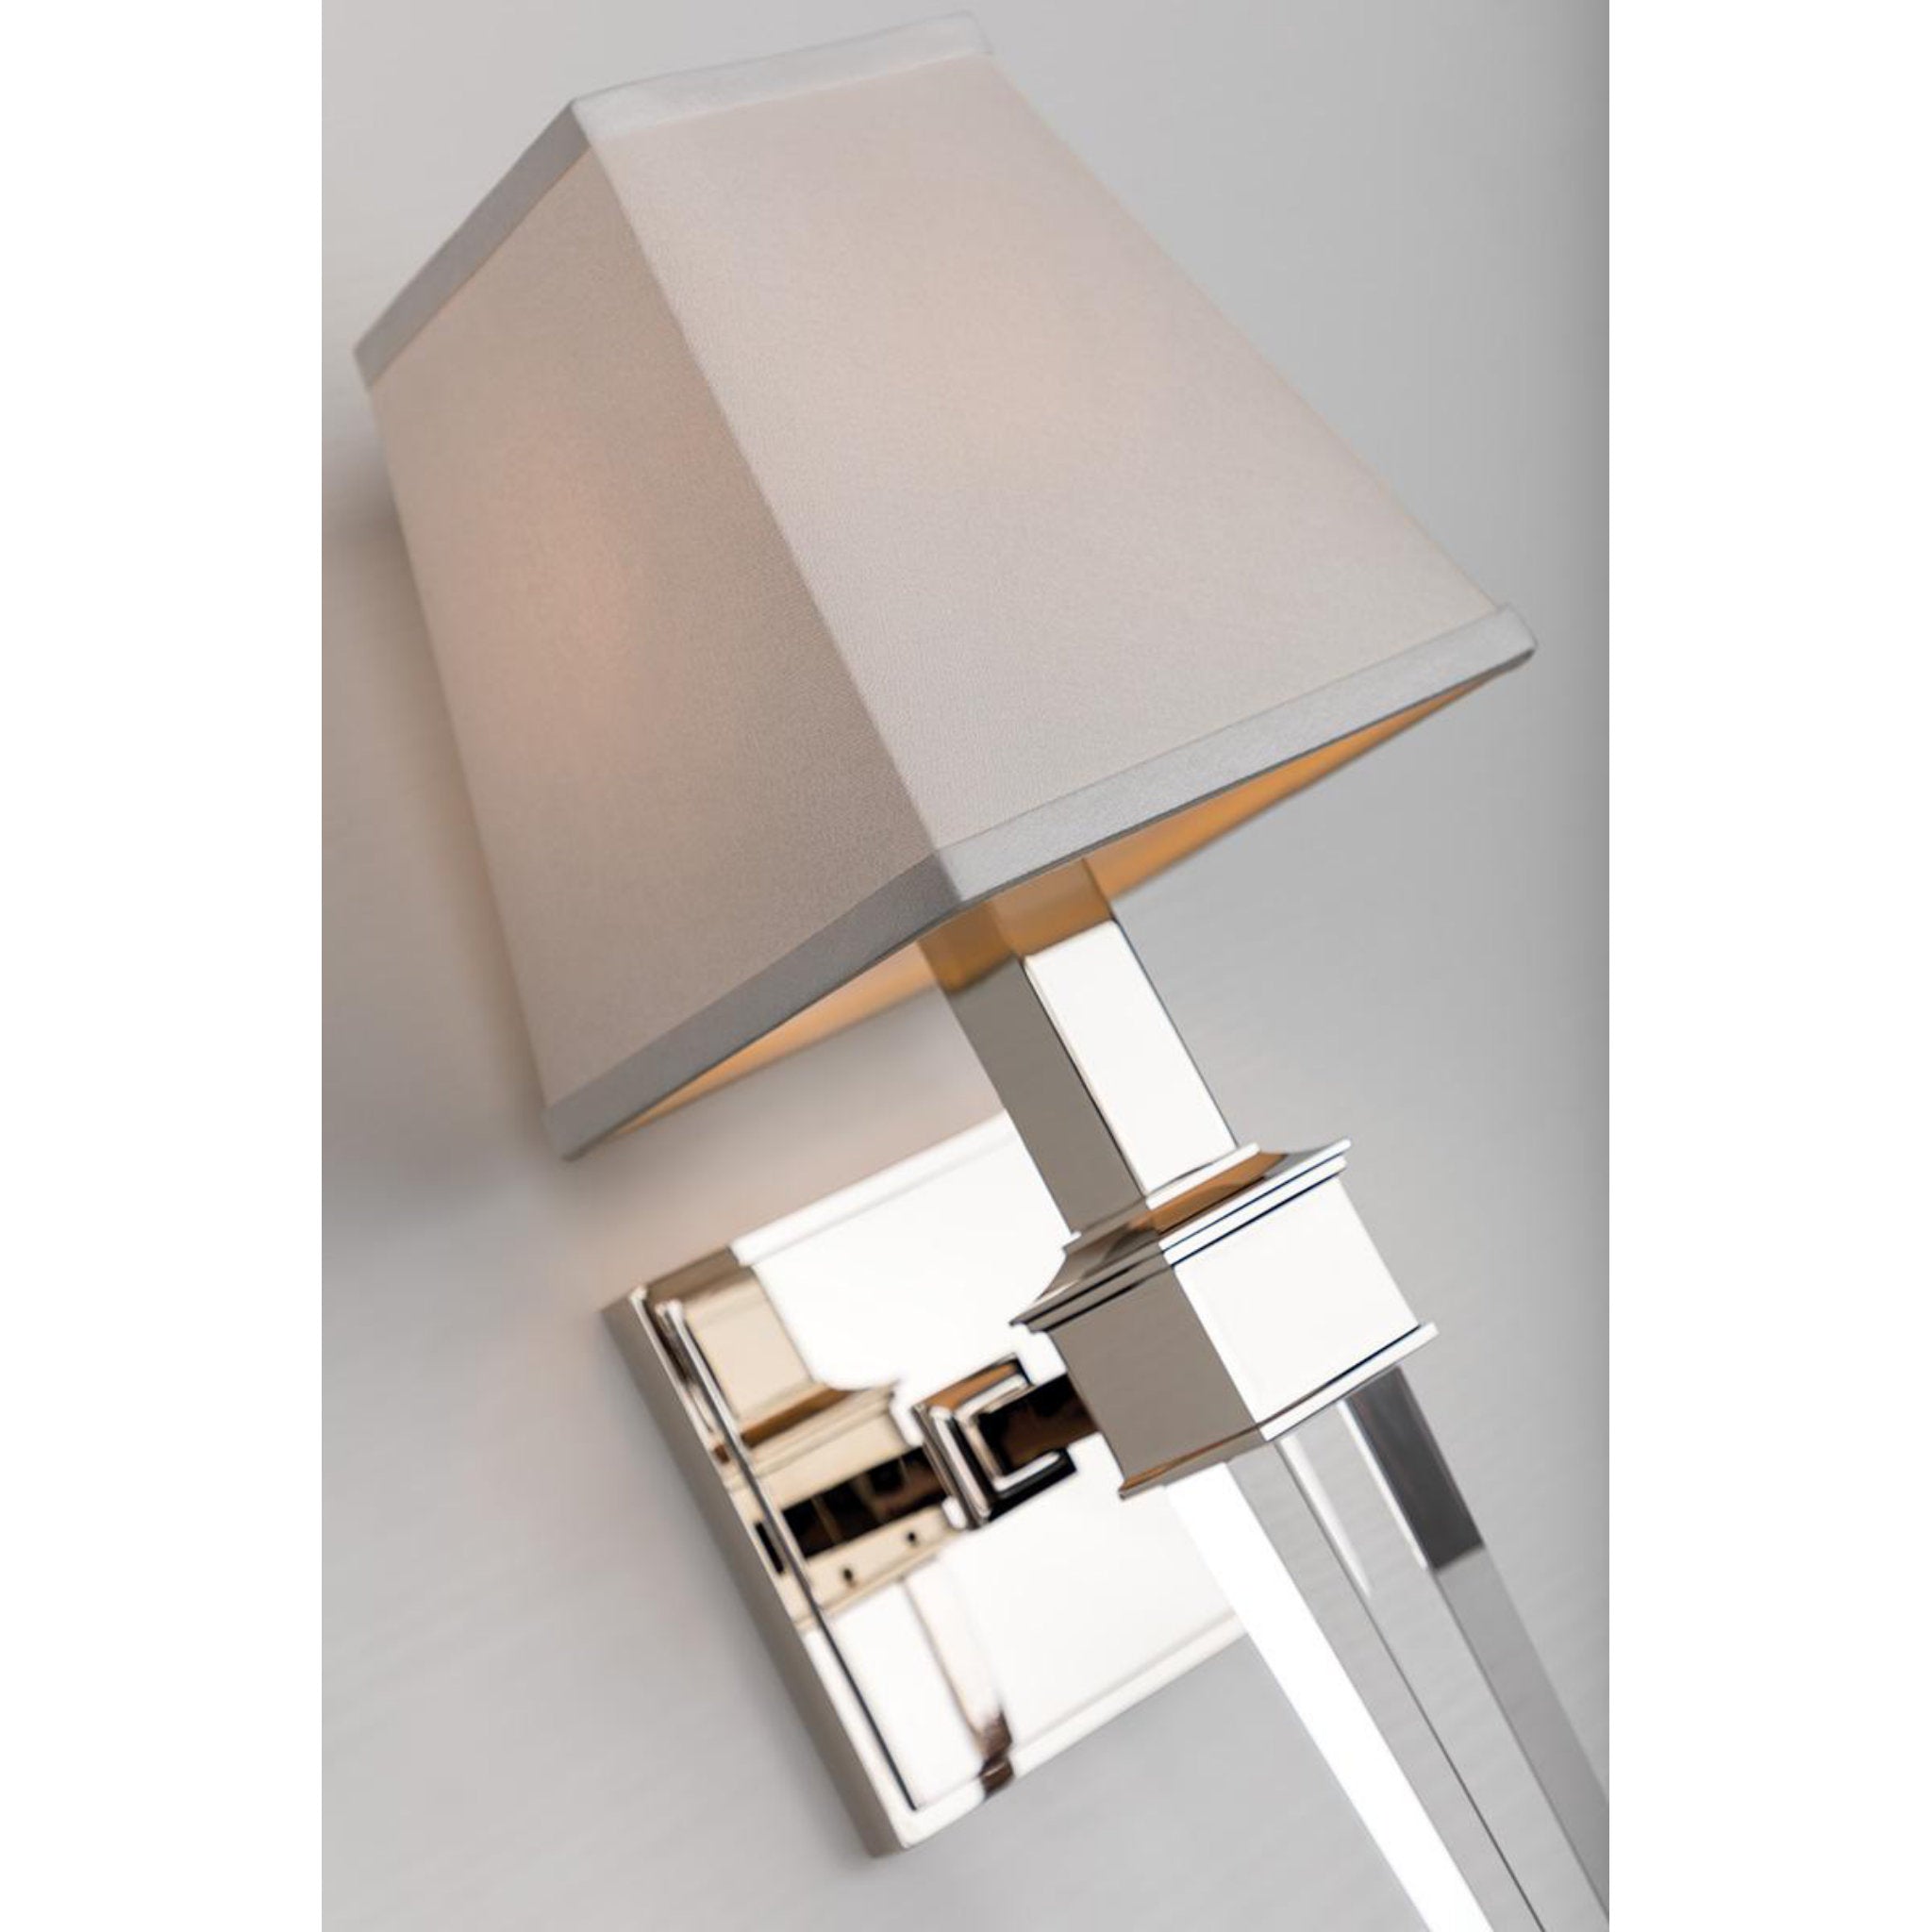 Ruskin 1 Light Wall Sconce in Polished Nickel